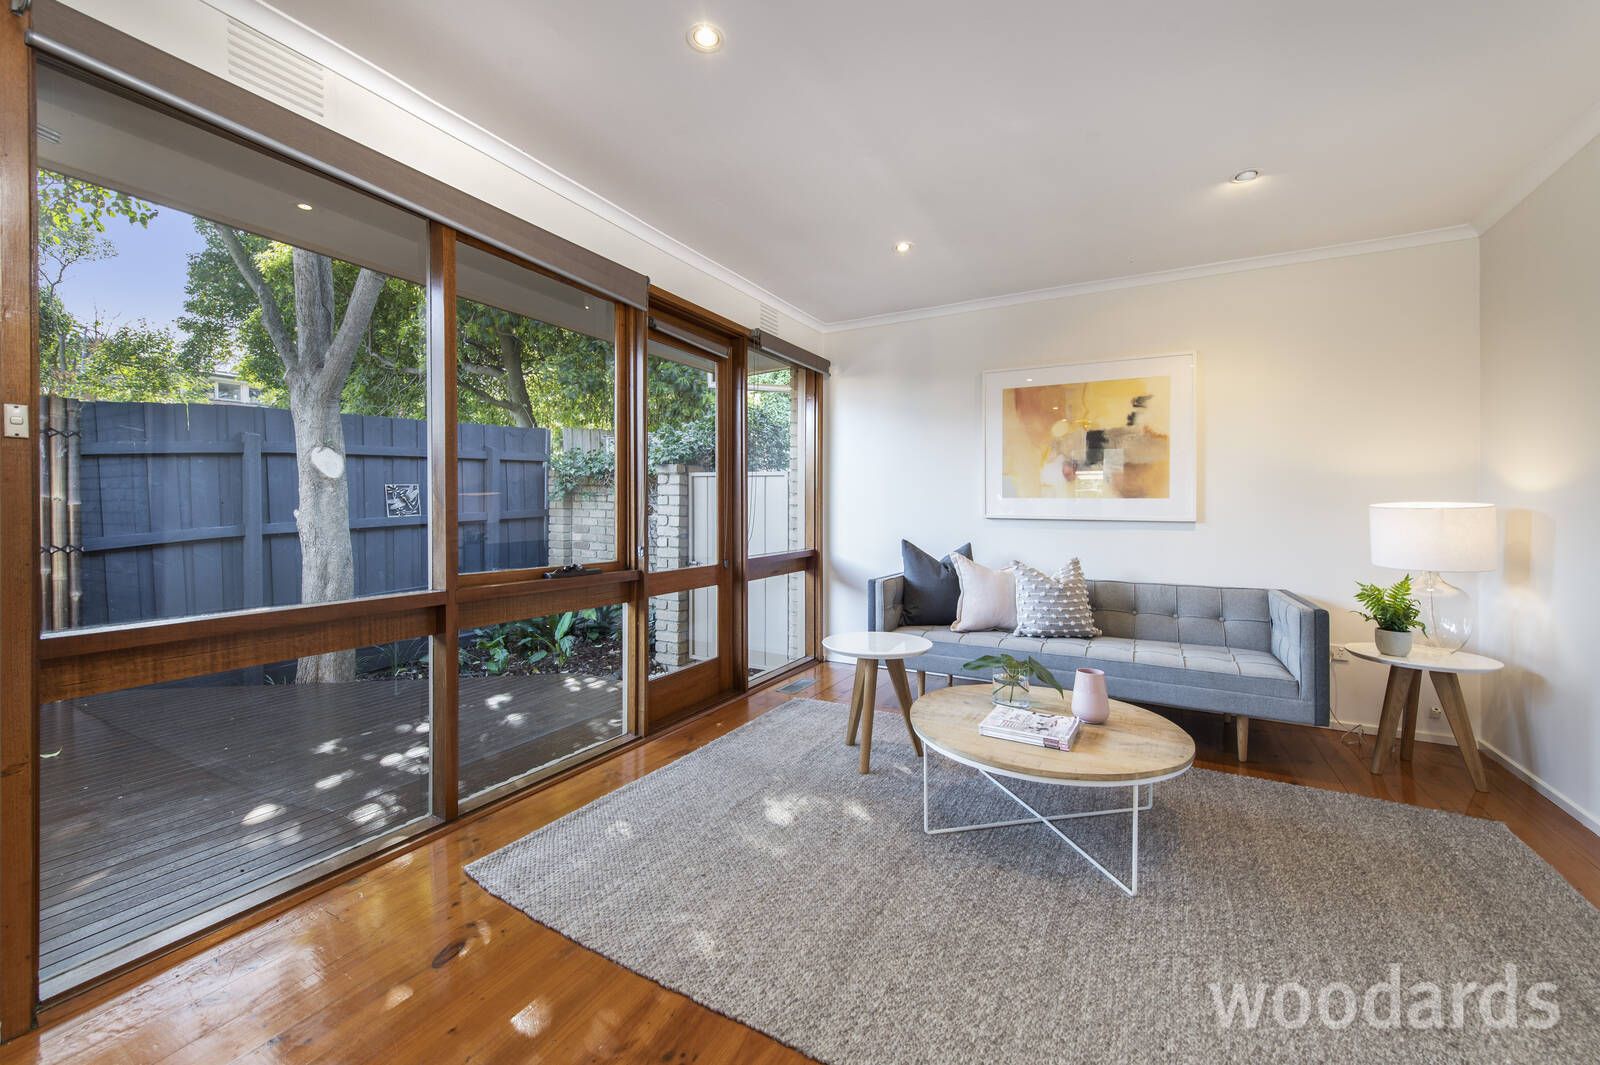 2 bedrooms Apartment / Unit / Flat in 4/25 Doonkuna Avenue CAMBERWELL VIC, 3124